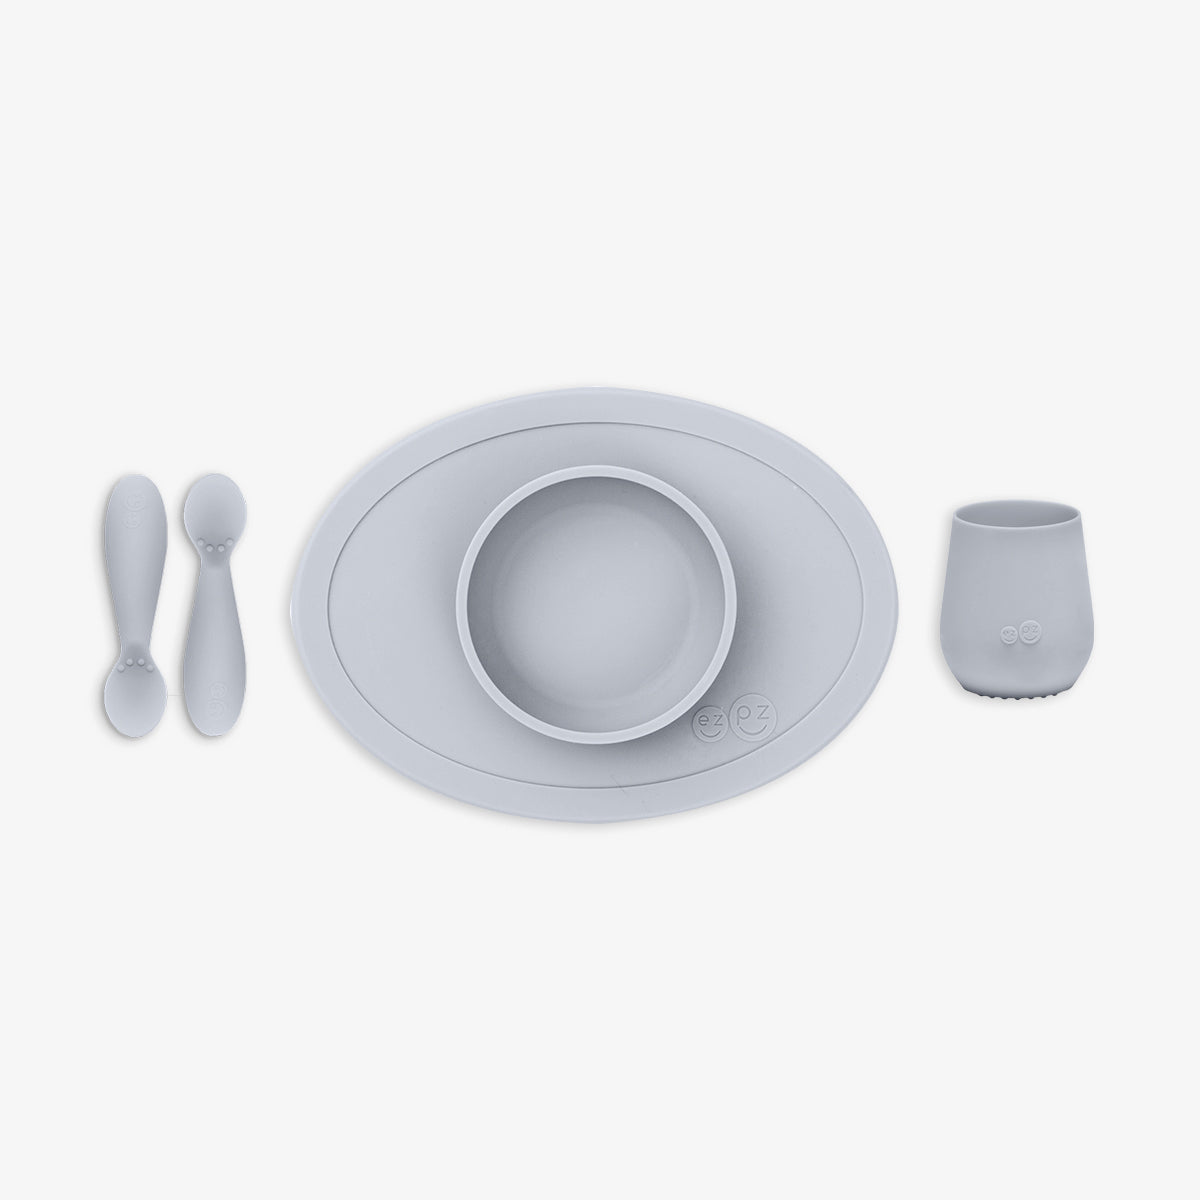 First Foods Set in Pewter by ezpz / The Original All-In-One Silicone Plates & Placemats that Stick to the Table